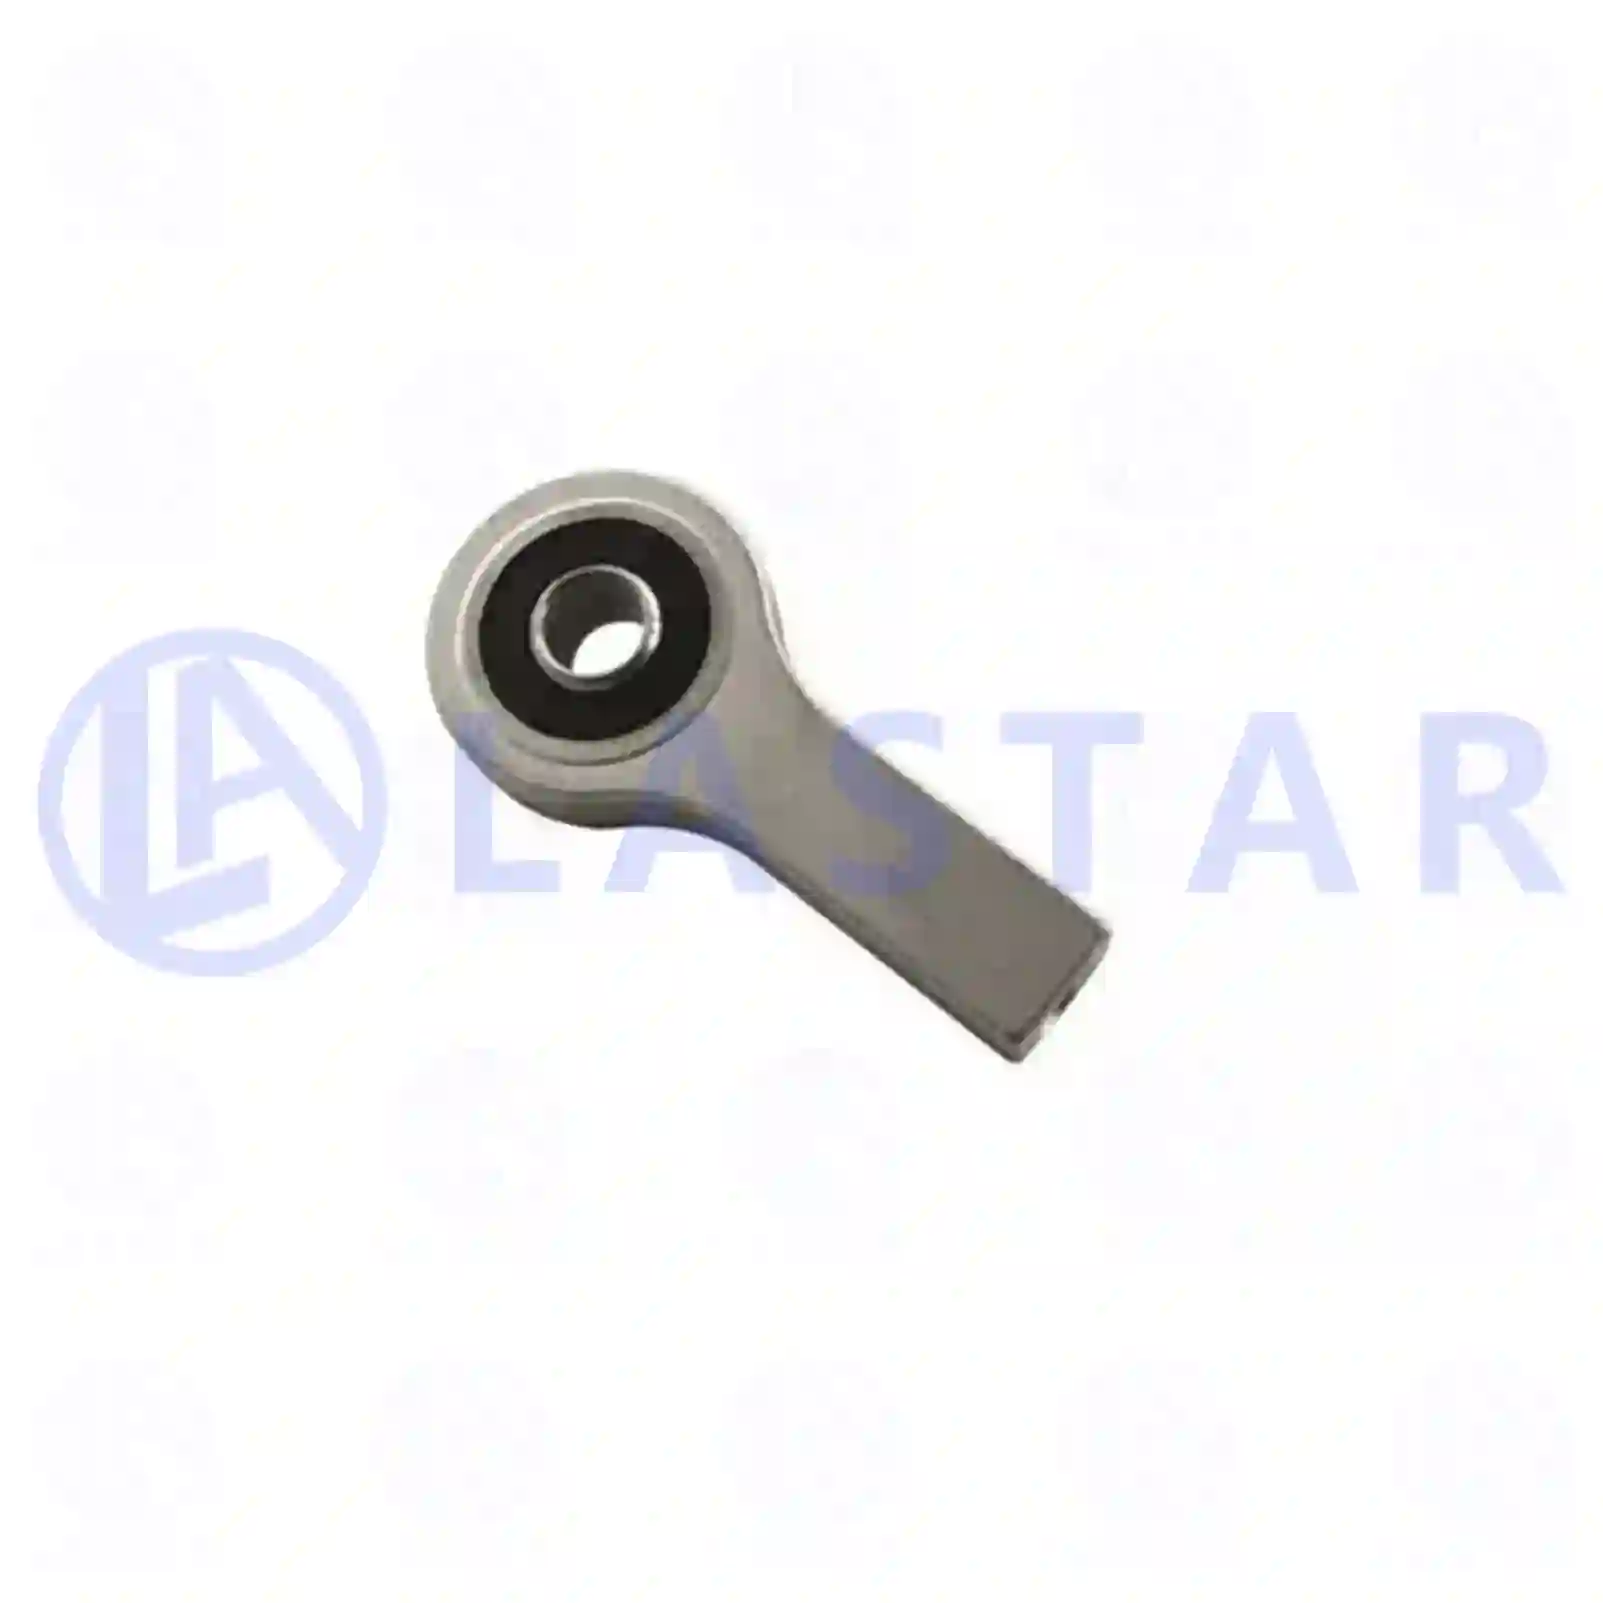  Bearing joint, cabin shock absorber || Lastar Spare Part | Truck Spare Parts, Auotomotive Spare Parts